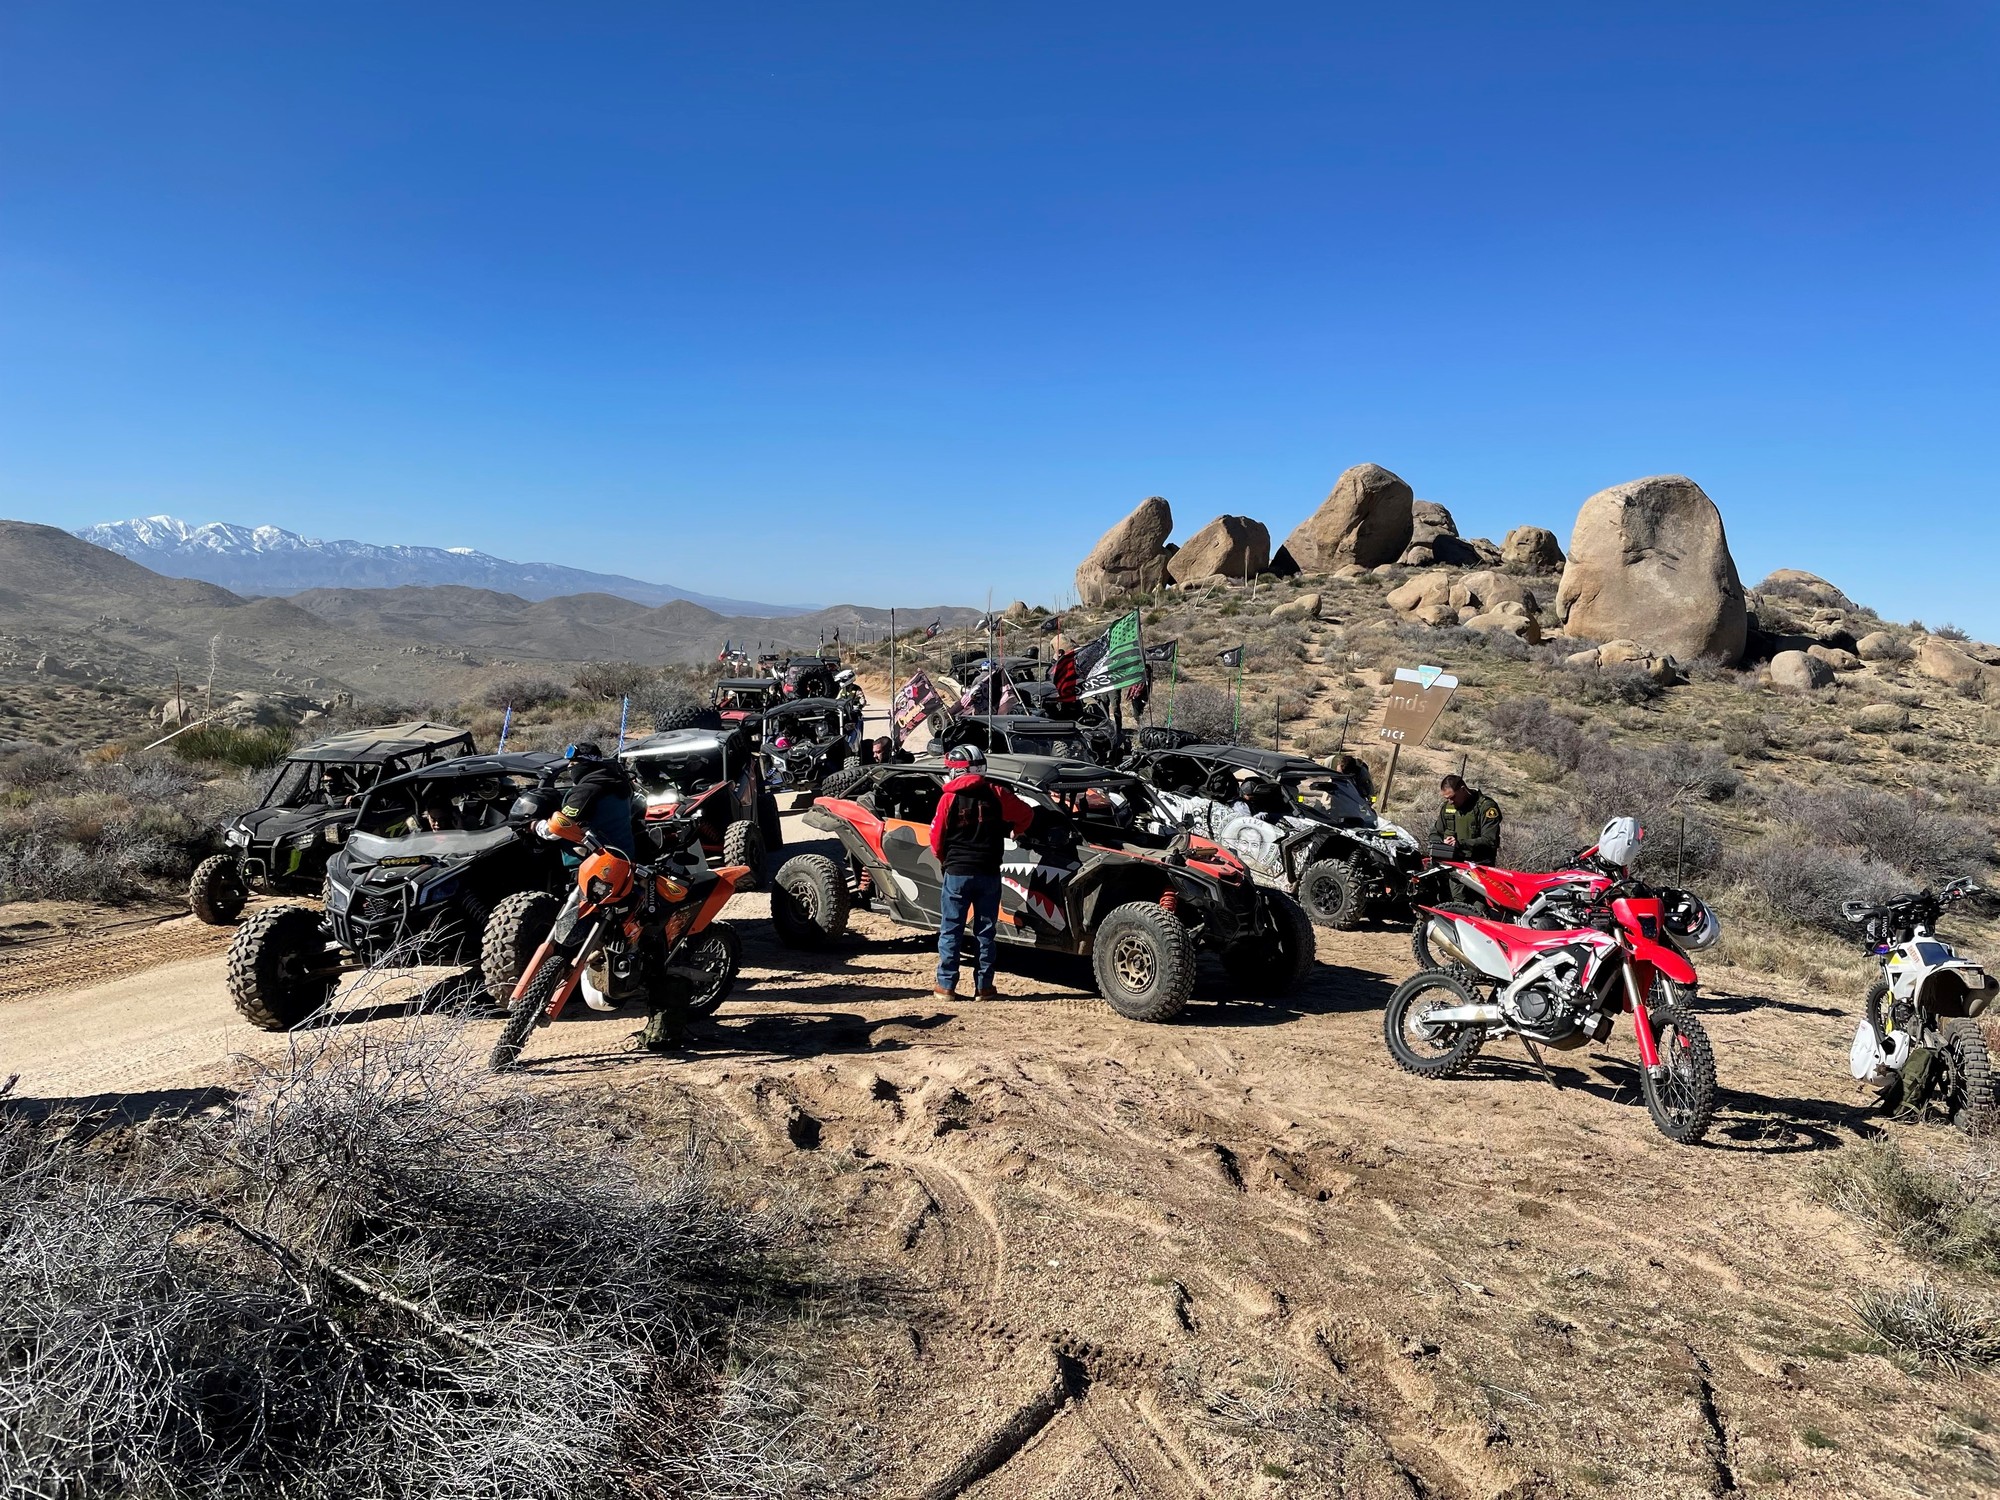 A group of  arked off-road vehicles are seen together in the desert.